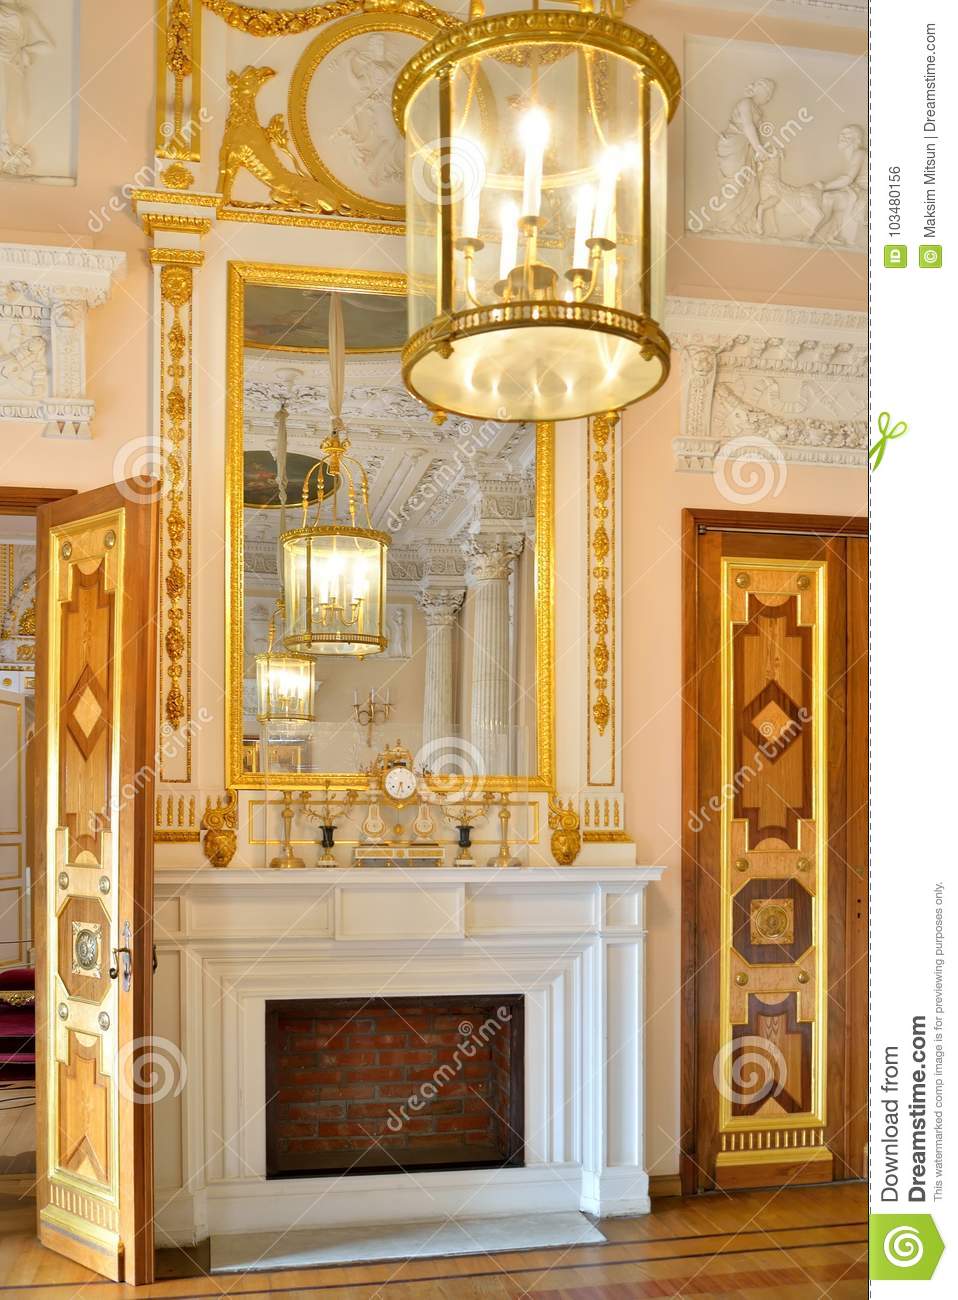 Fireplace Mirror Elegant the Fireplace Mirror and Chandelier In the Marble Dining